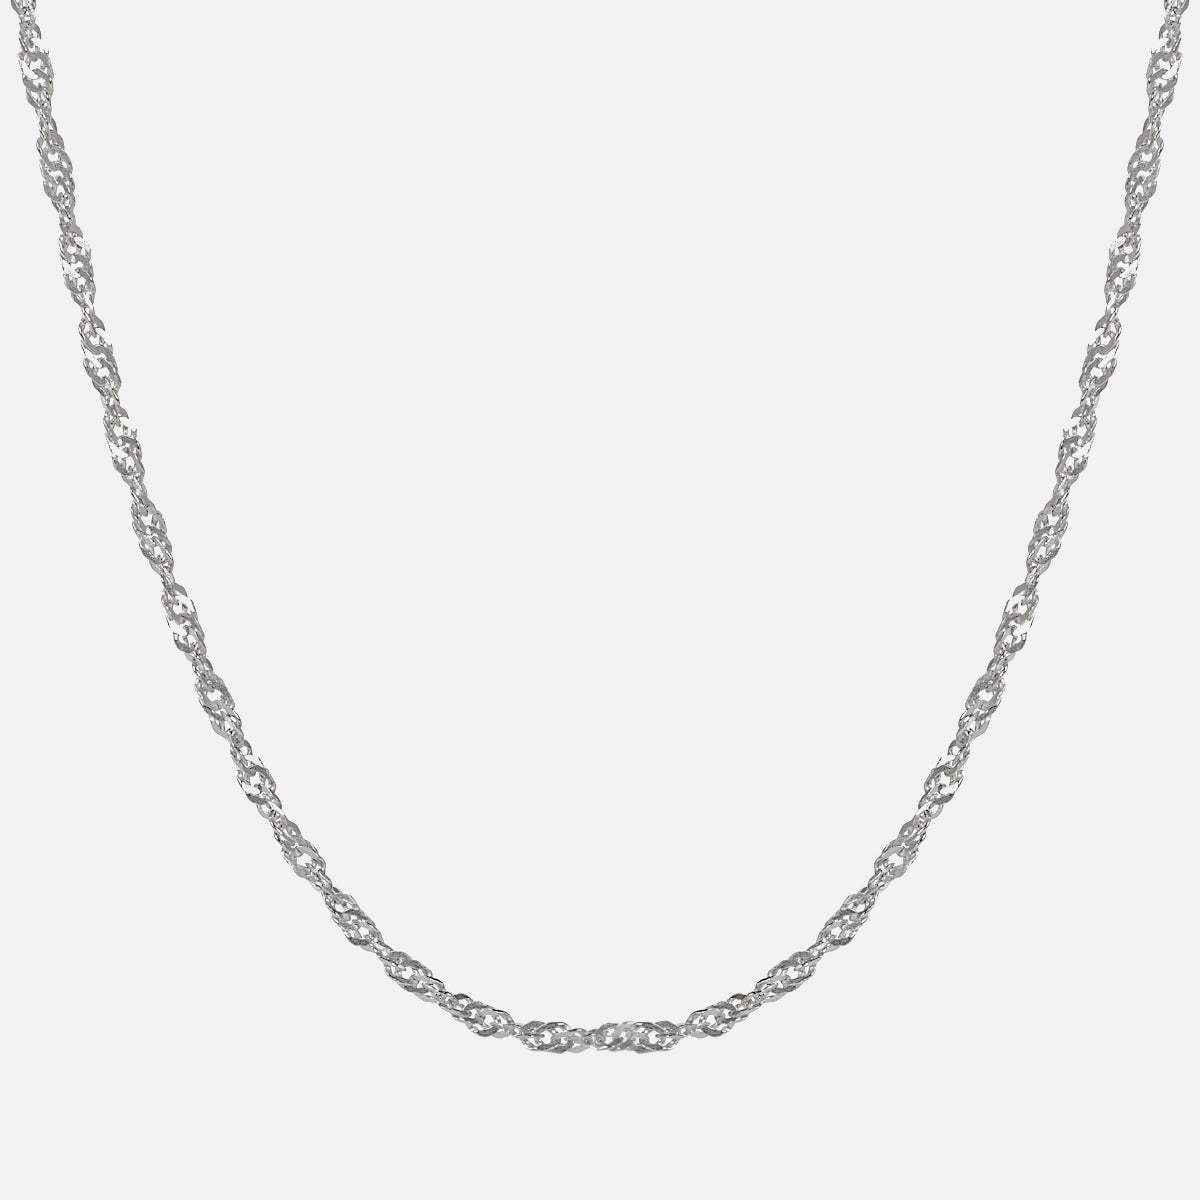 Sterling silver chain with twisted links 20 inches 